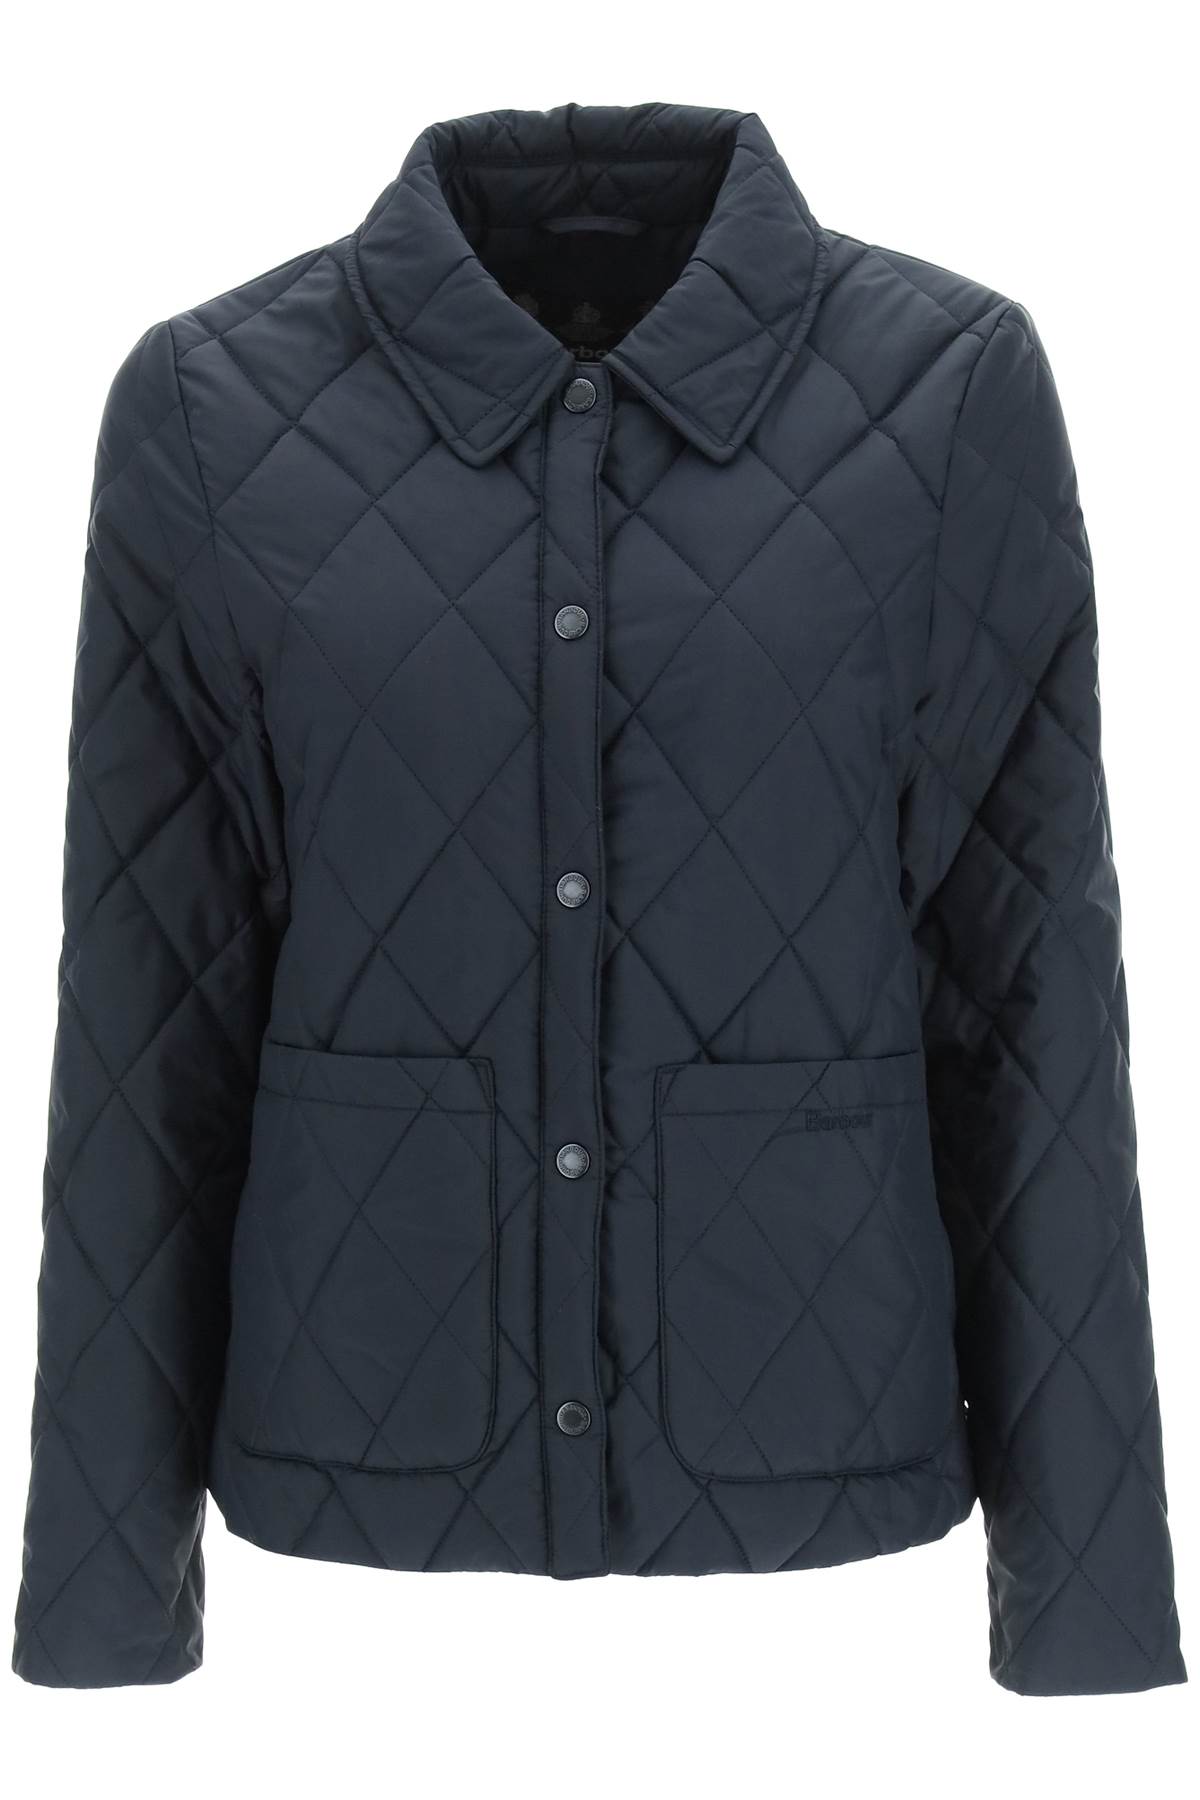 Barbour Colliford Quilted Jacket